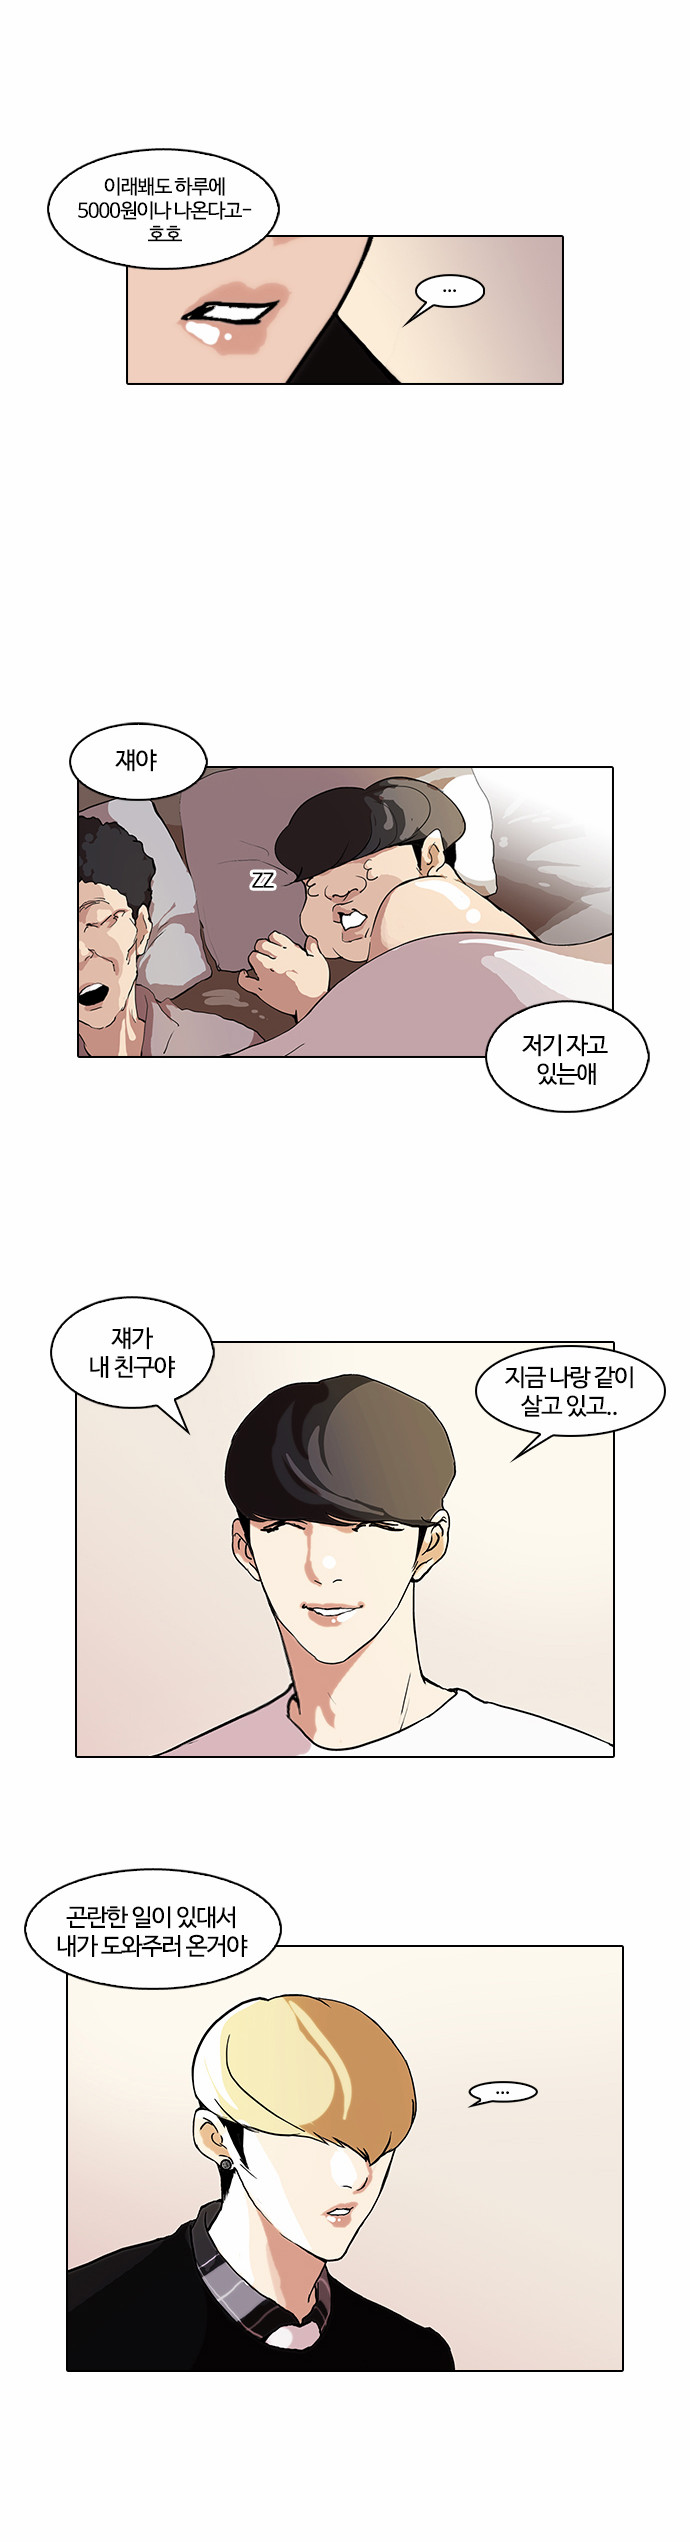 Lookism - Chapter 48 - Page 3